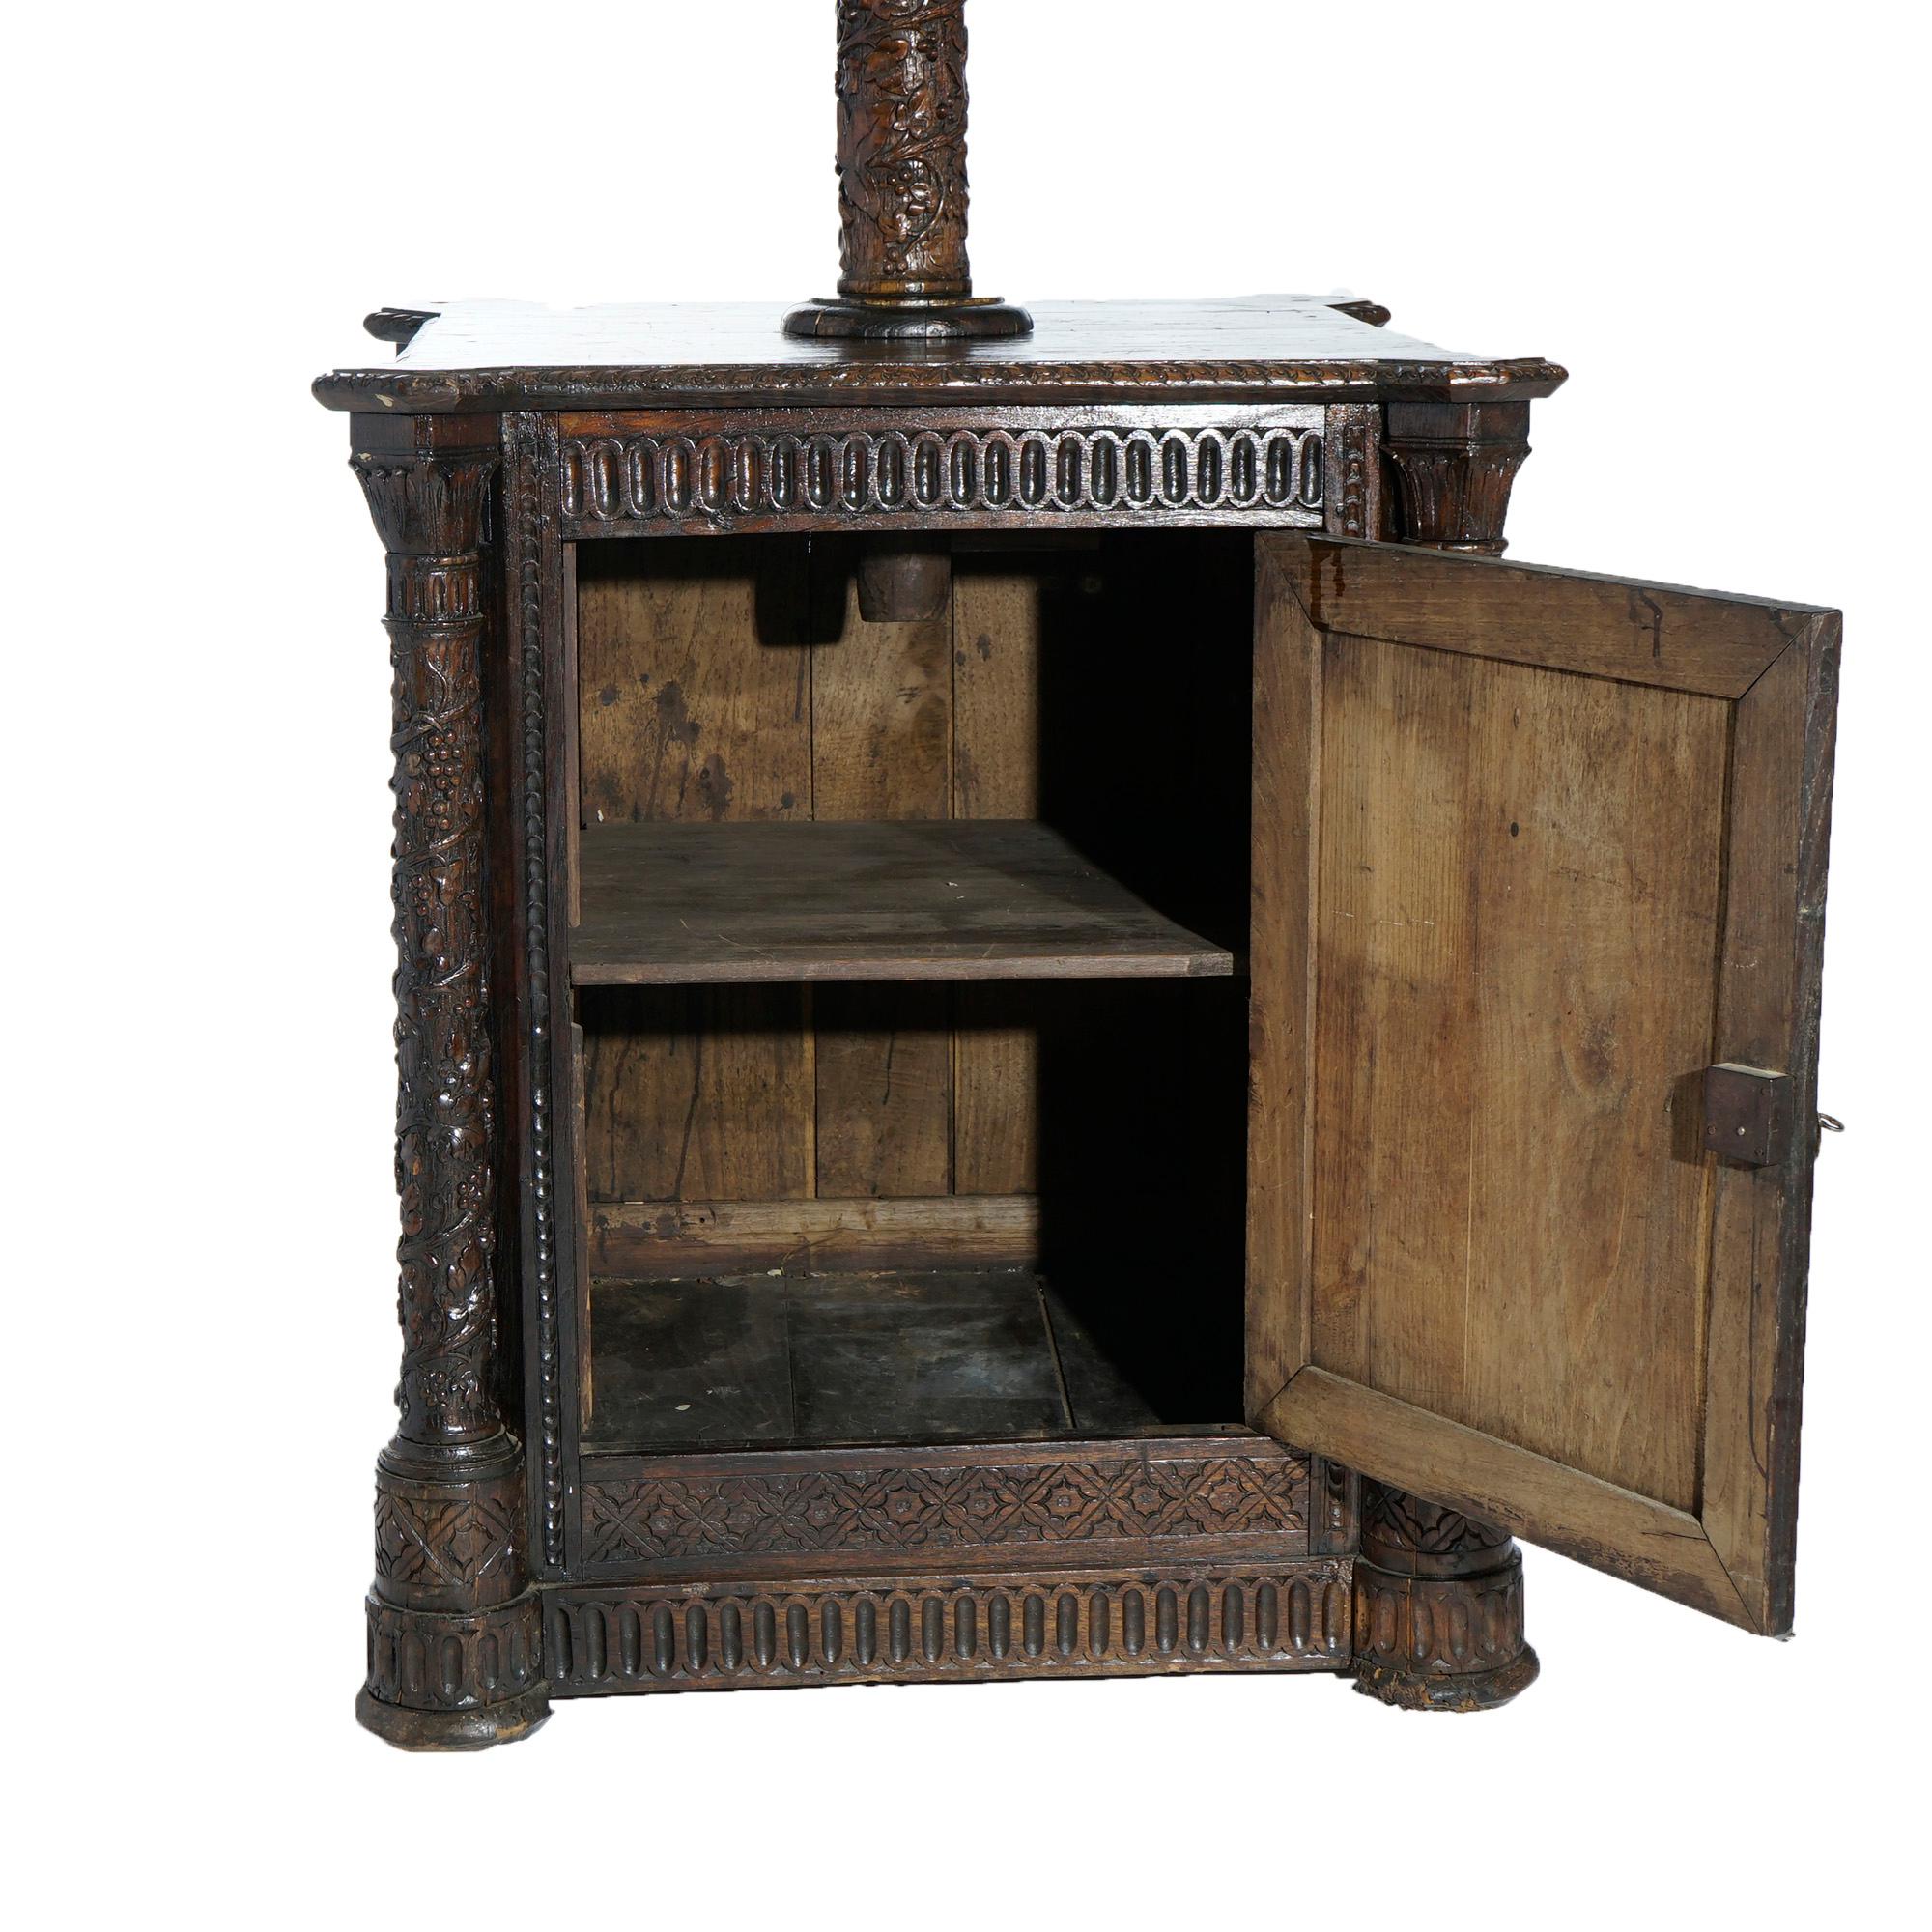 Early Antique Continental Carved Oak Reliquary Cabinet & Carved Columns 18th C For Sale 2